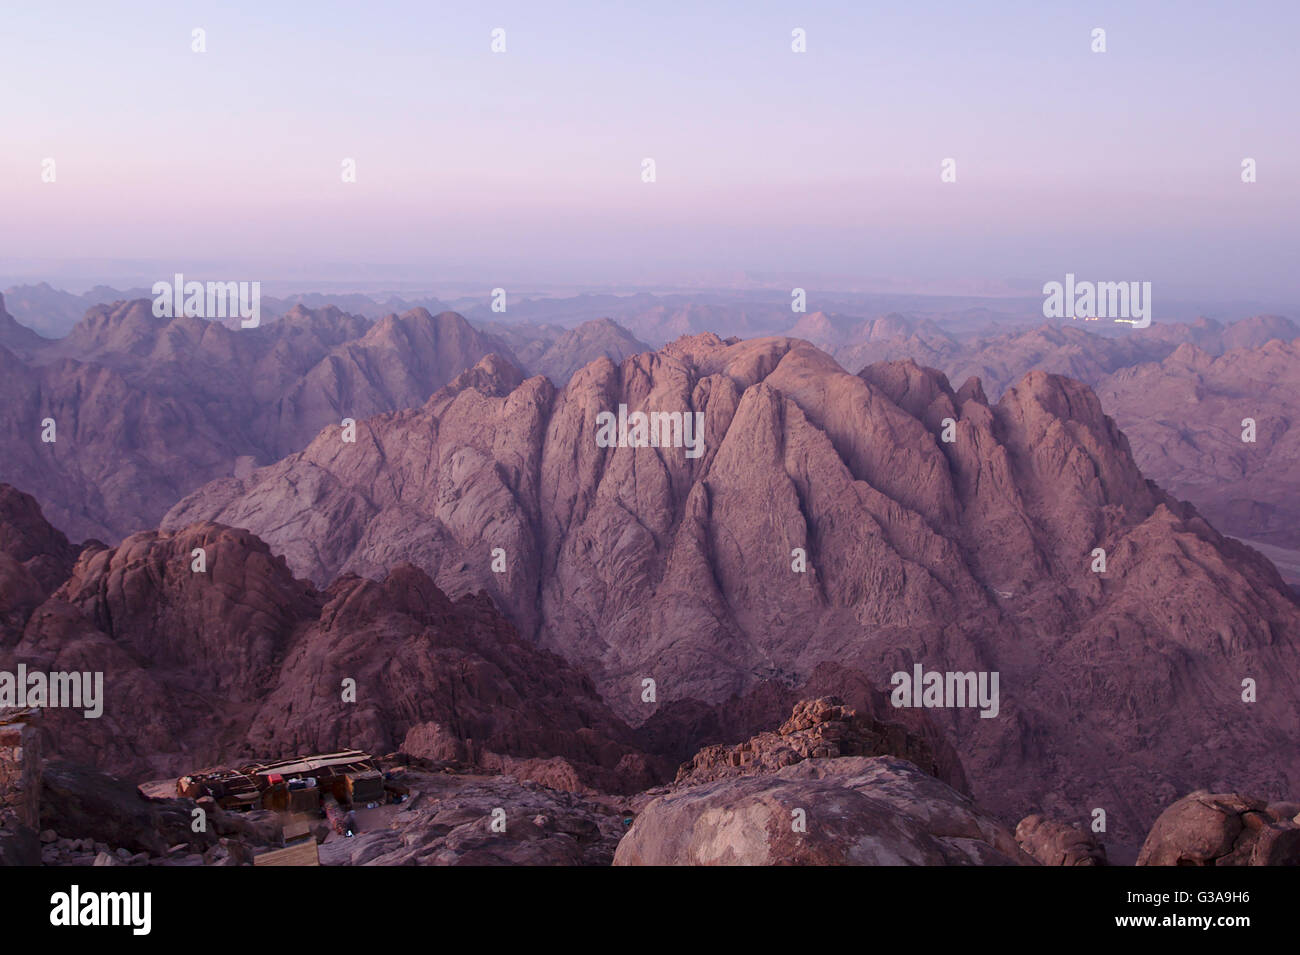 View from the summit of Mount Sinai at dusk, Egypt Stock Photo